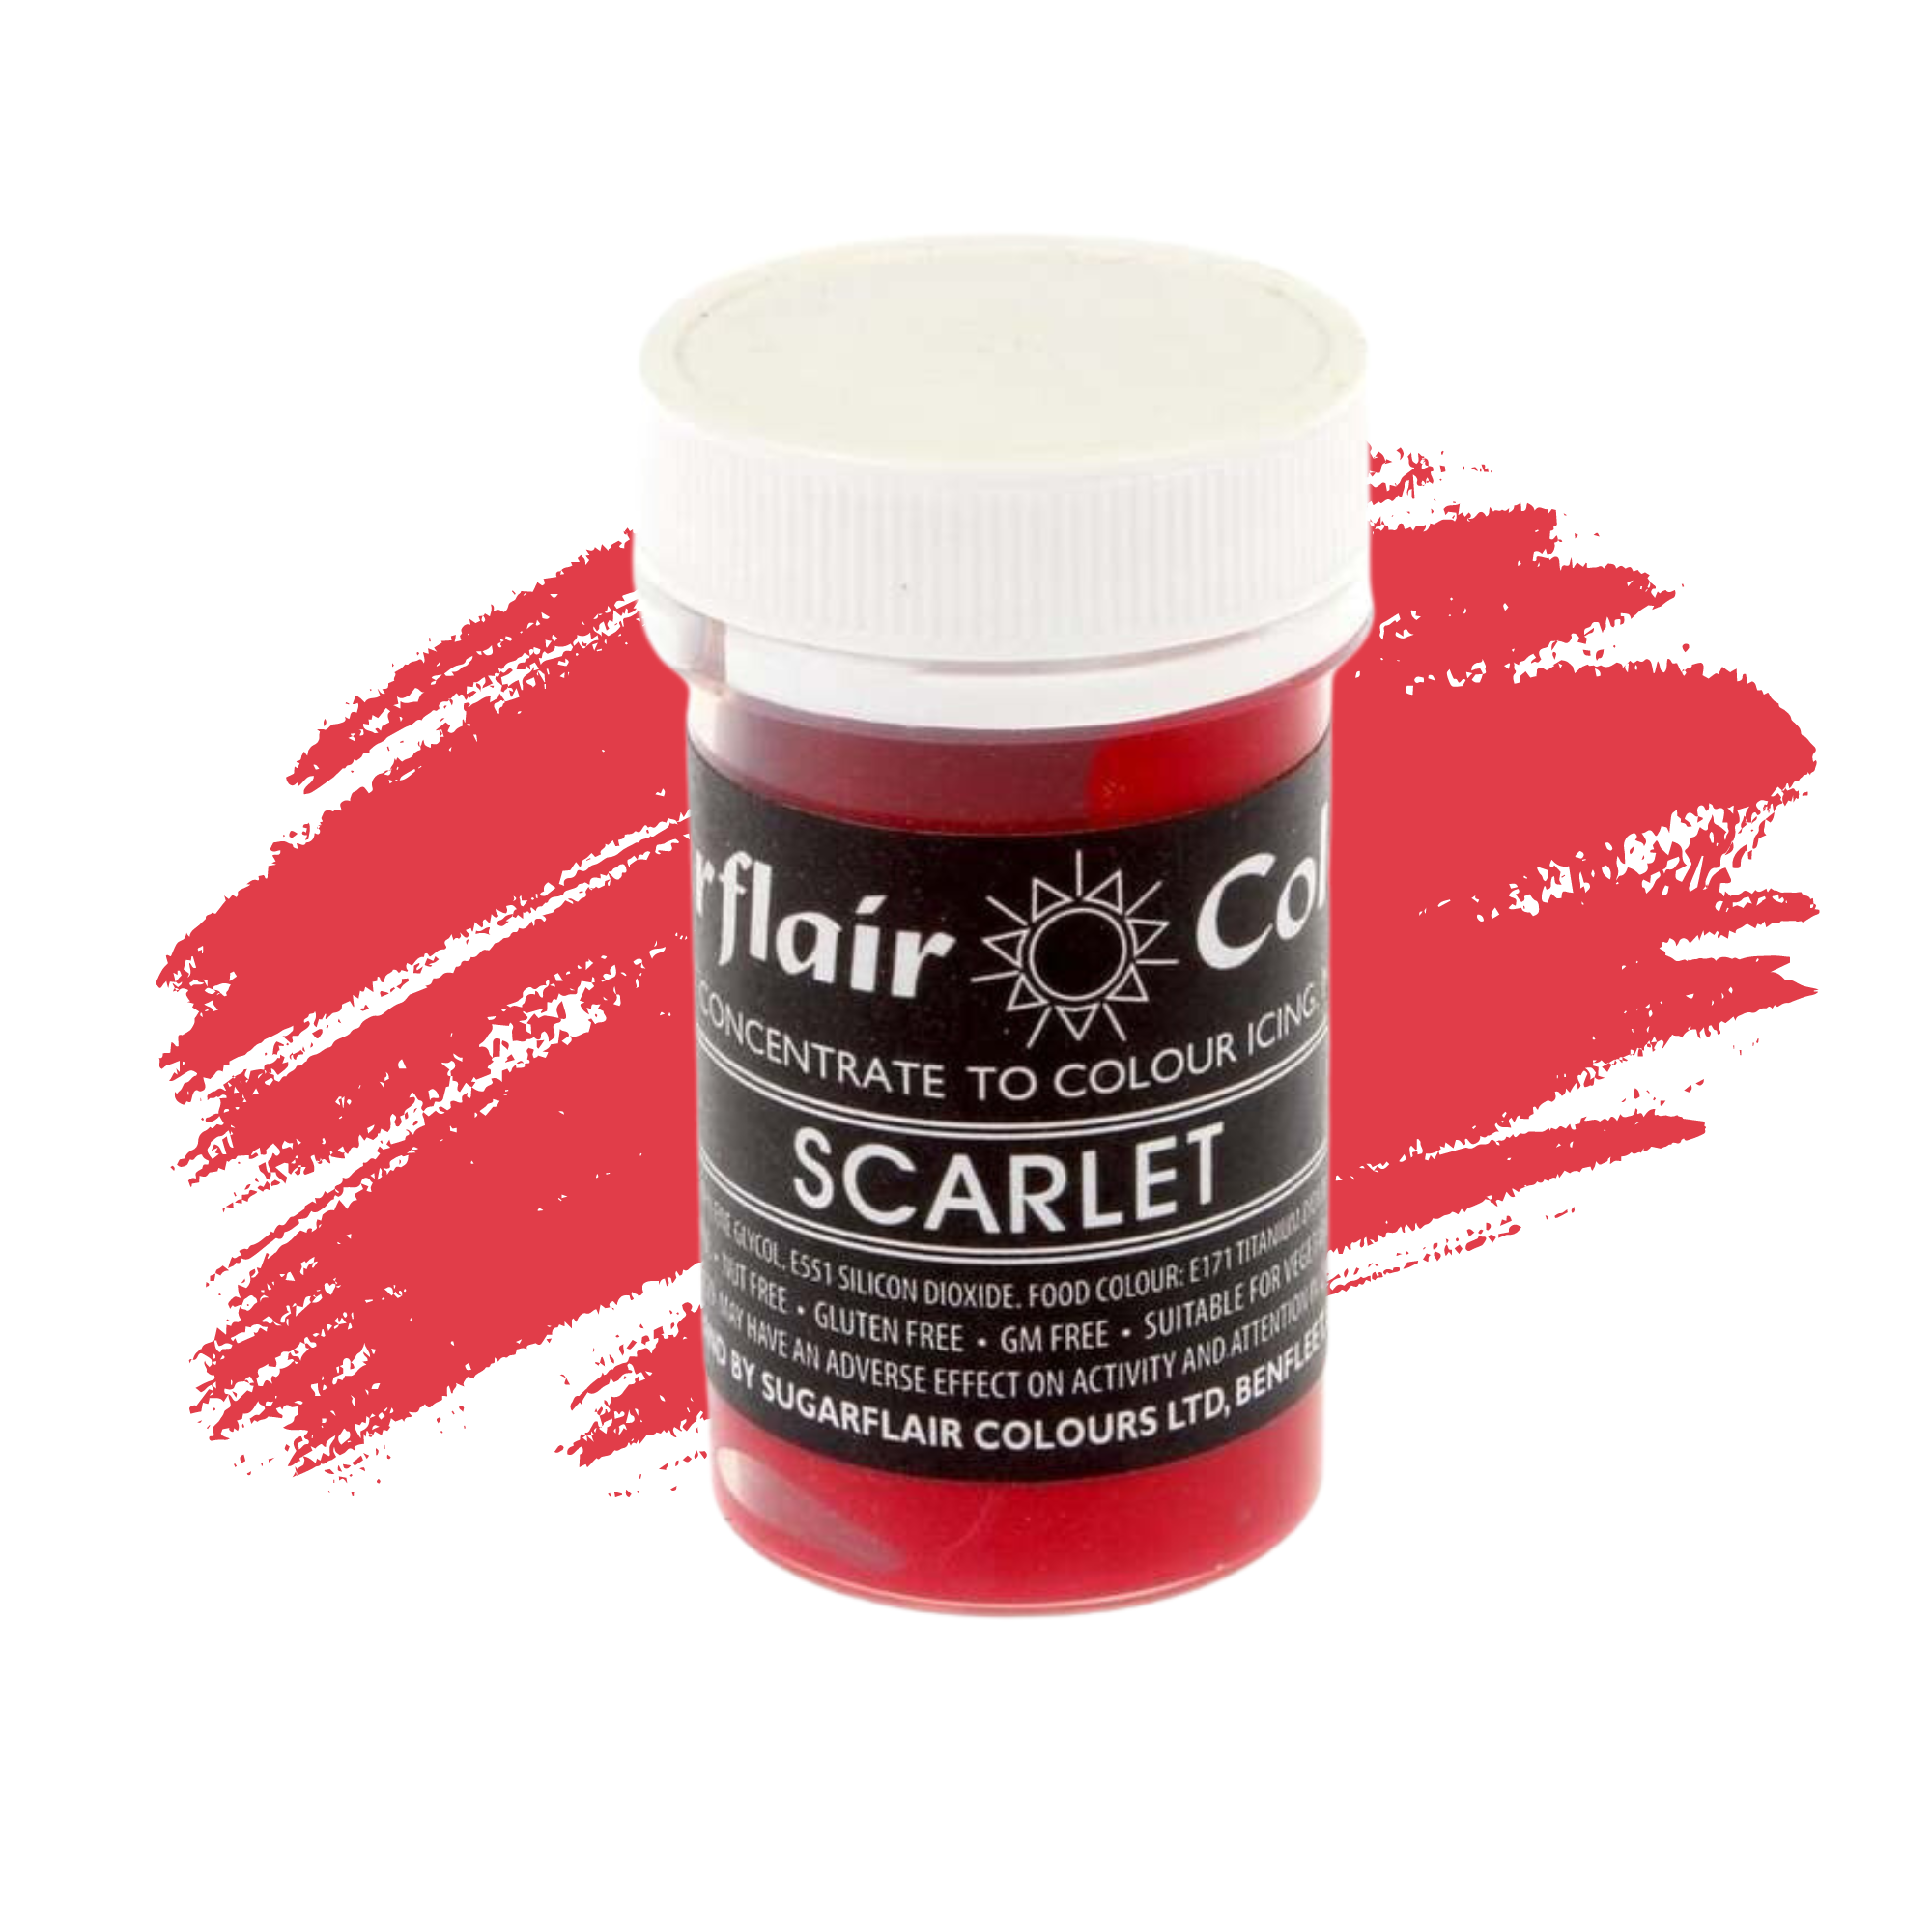 Sugarflair Paste Colours Concentrated Food Colouring - Pastel Scarlet - 25g